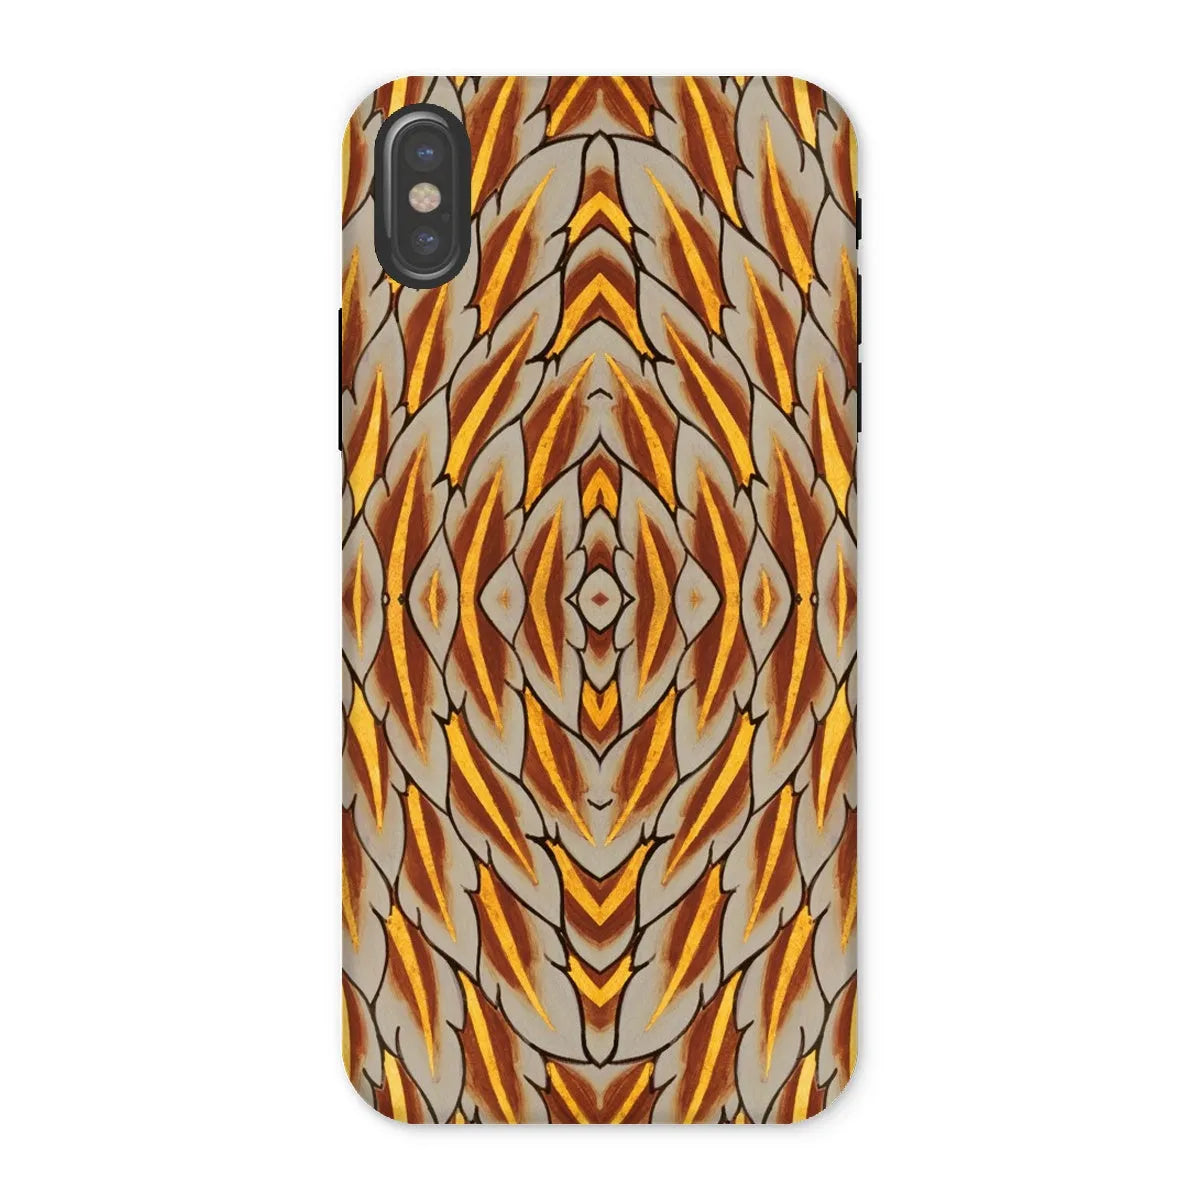 Featherweight Champion Thai Aesthetic Art Phone Case - Iphone x / Matte - Mobile Phone Cases - Aesthetic Art